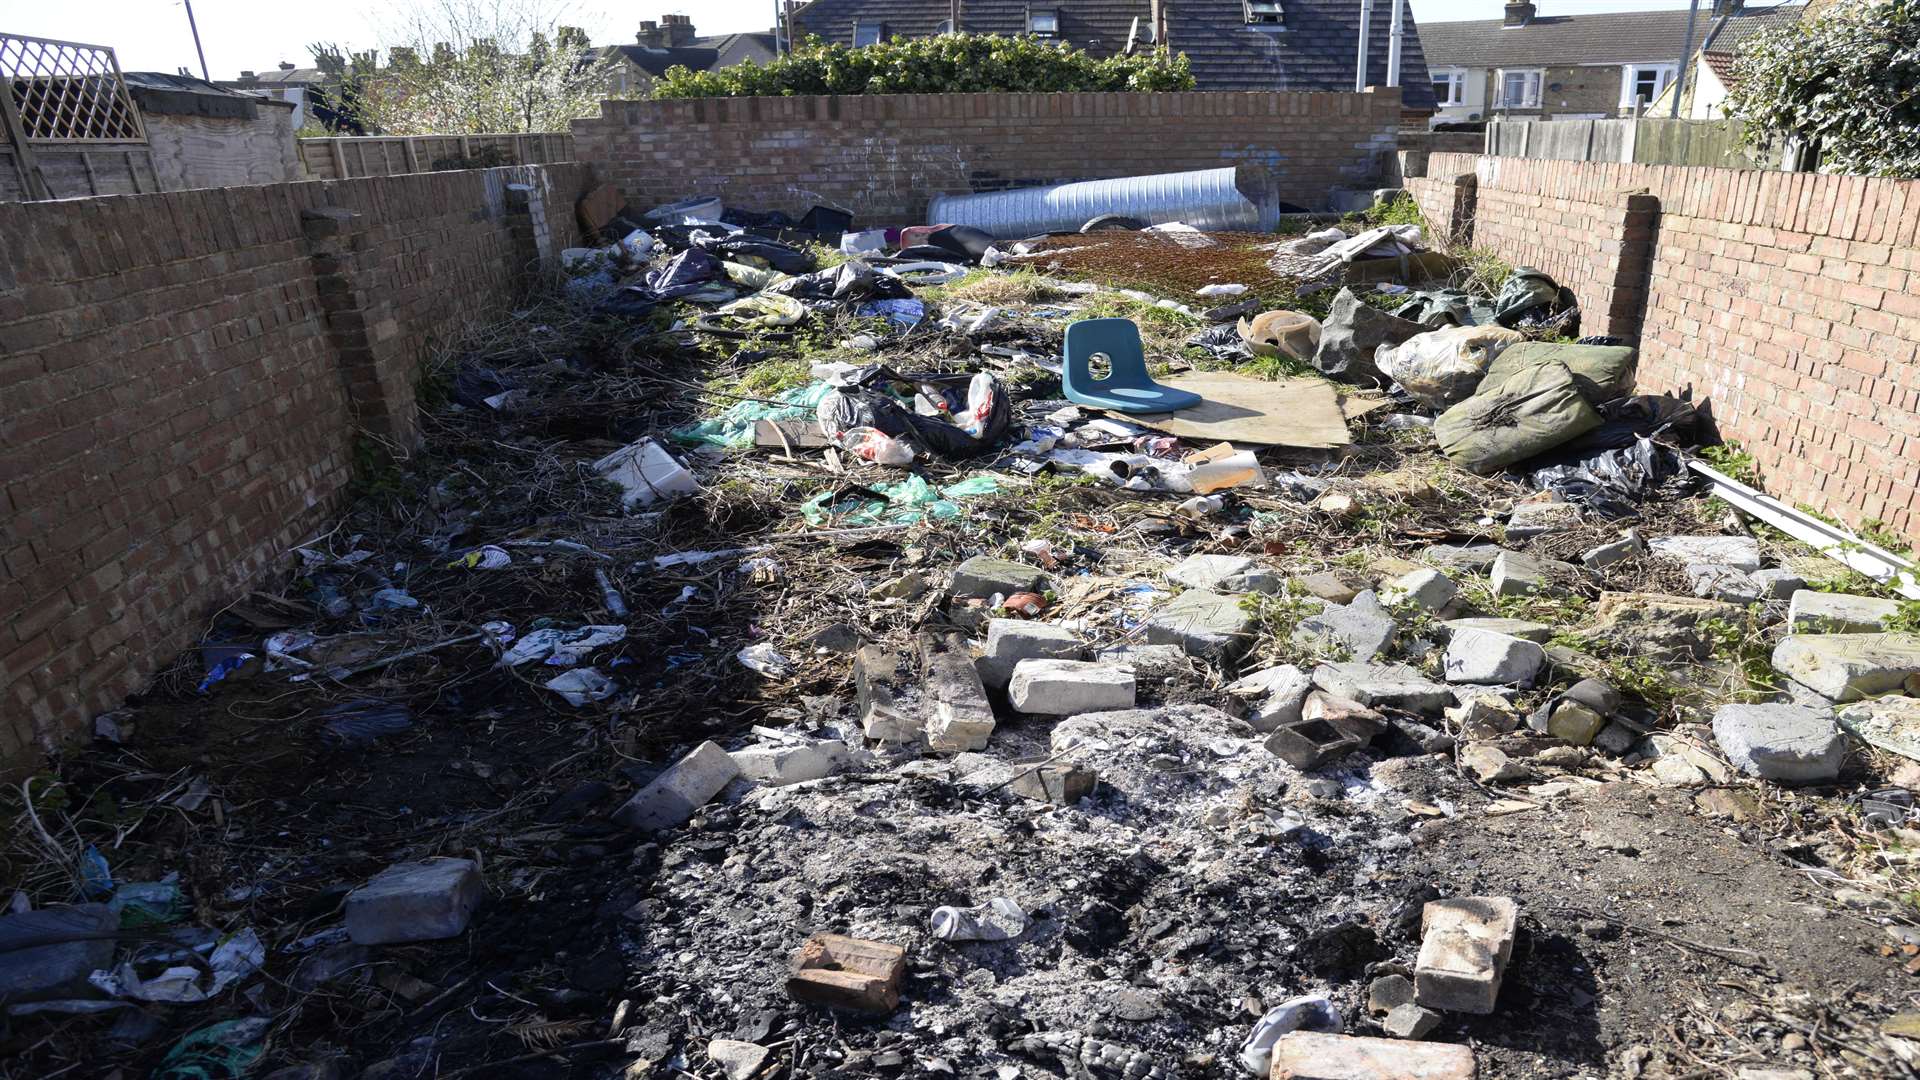 Rubbish dumped in the alley behind homes in Unity Street, Sheerness, may contain asbestos according to residents. Picture: Chris Davey